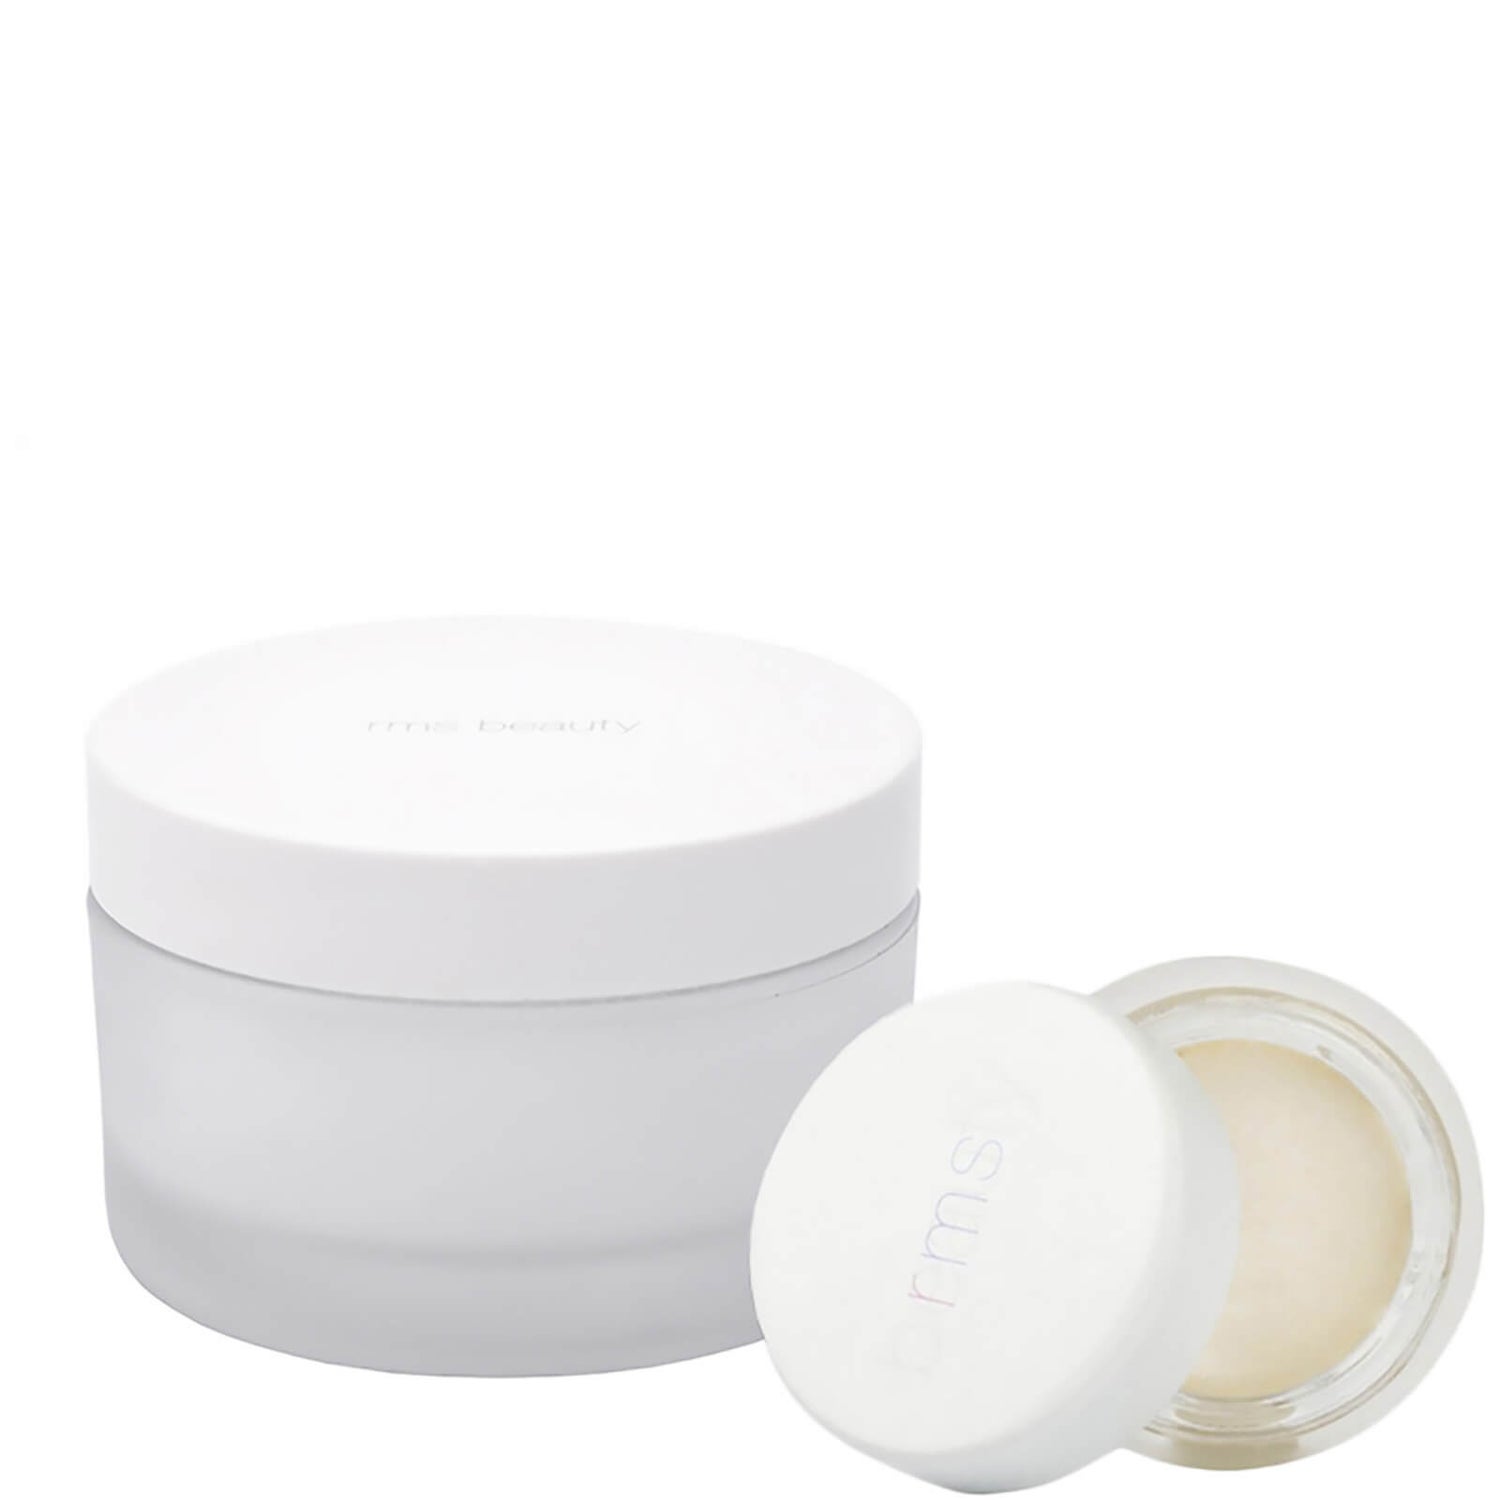 RMS Beauty Bestsellers Duo (Save 15%)